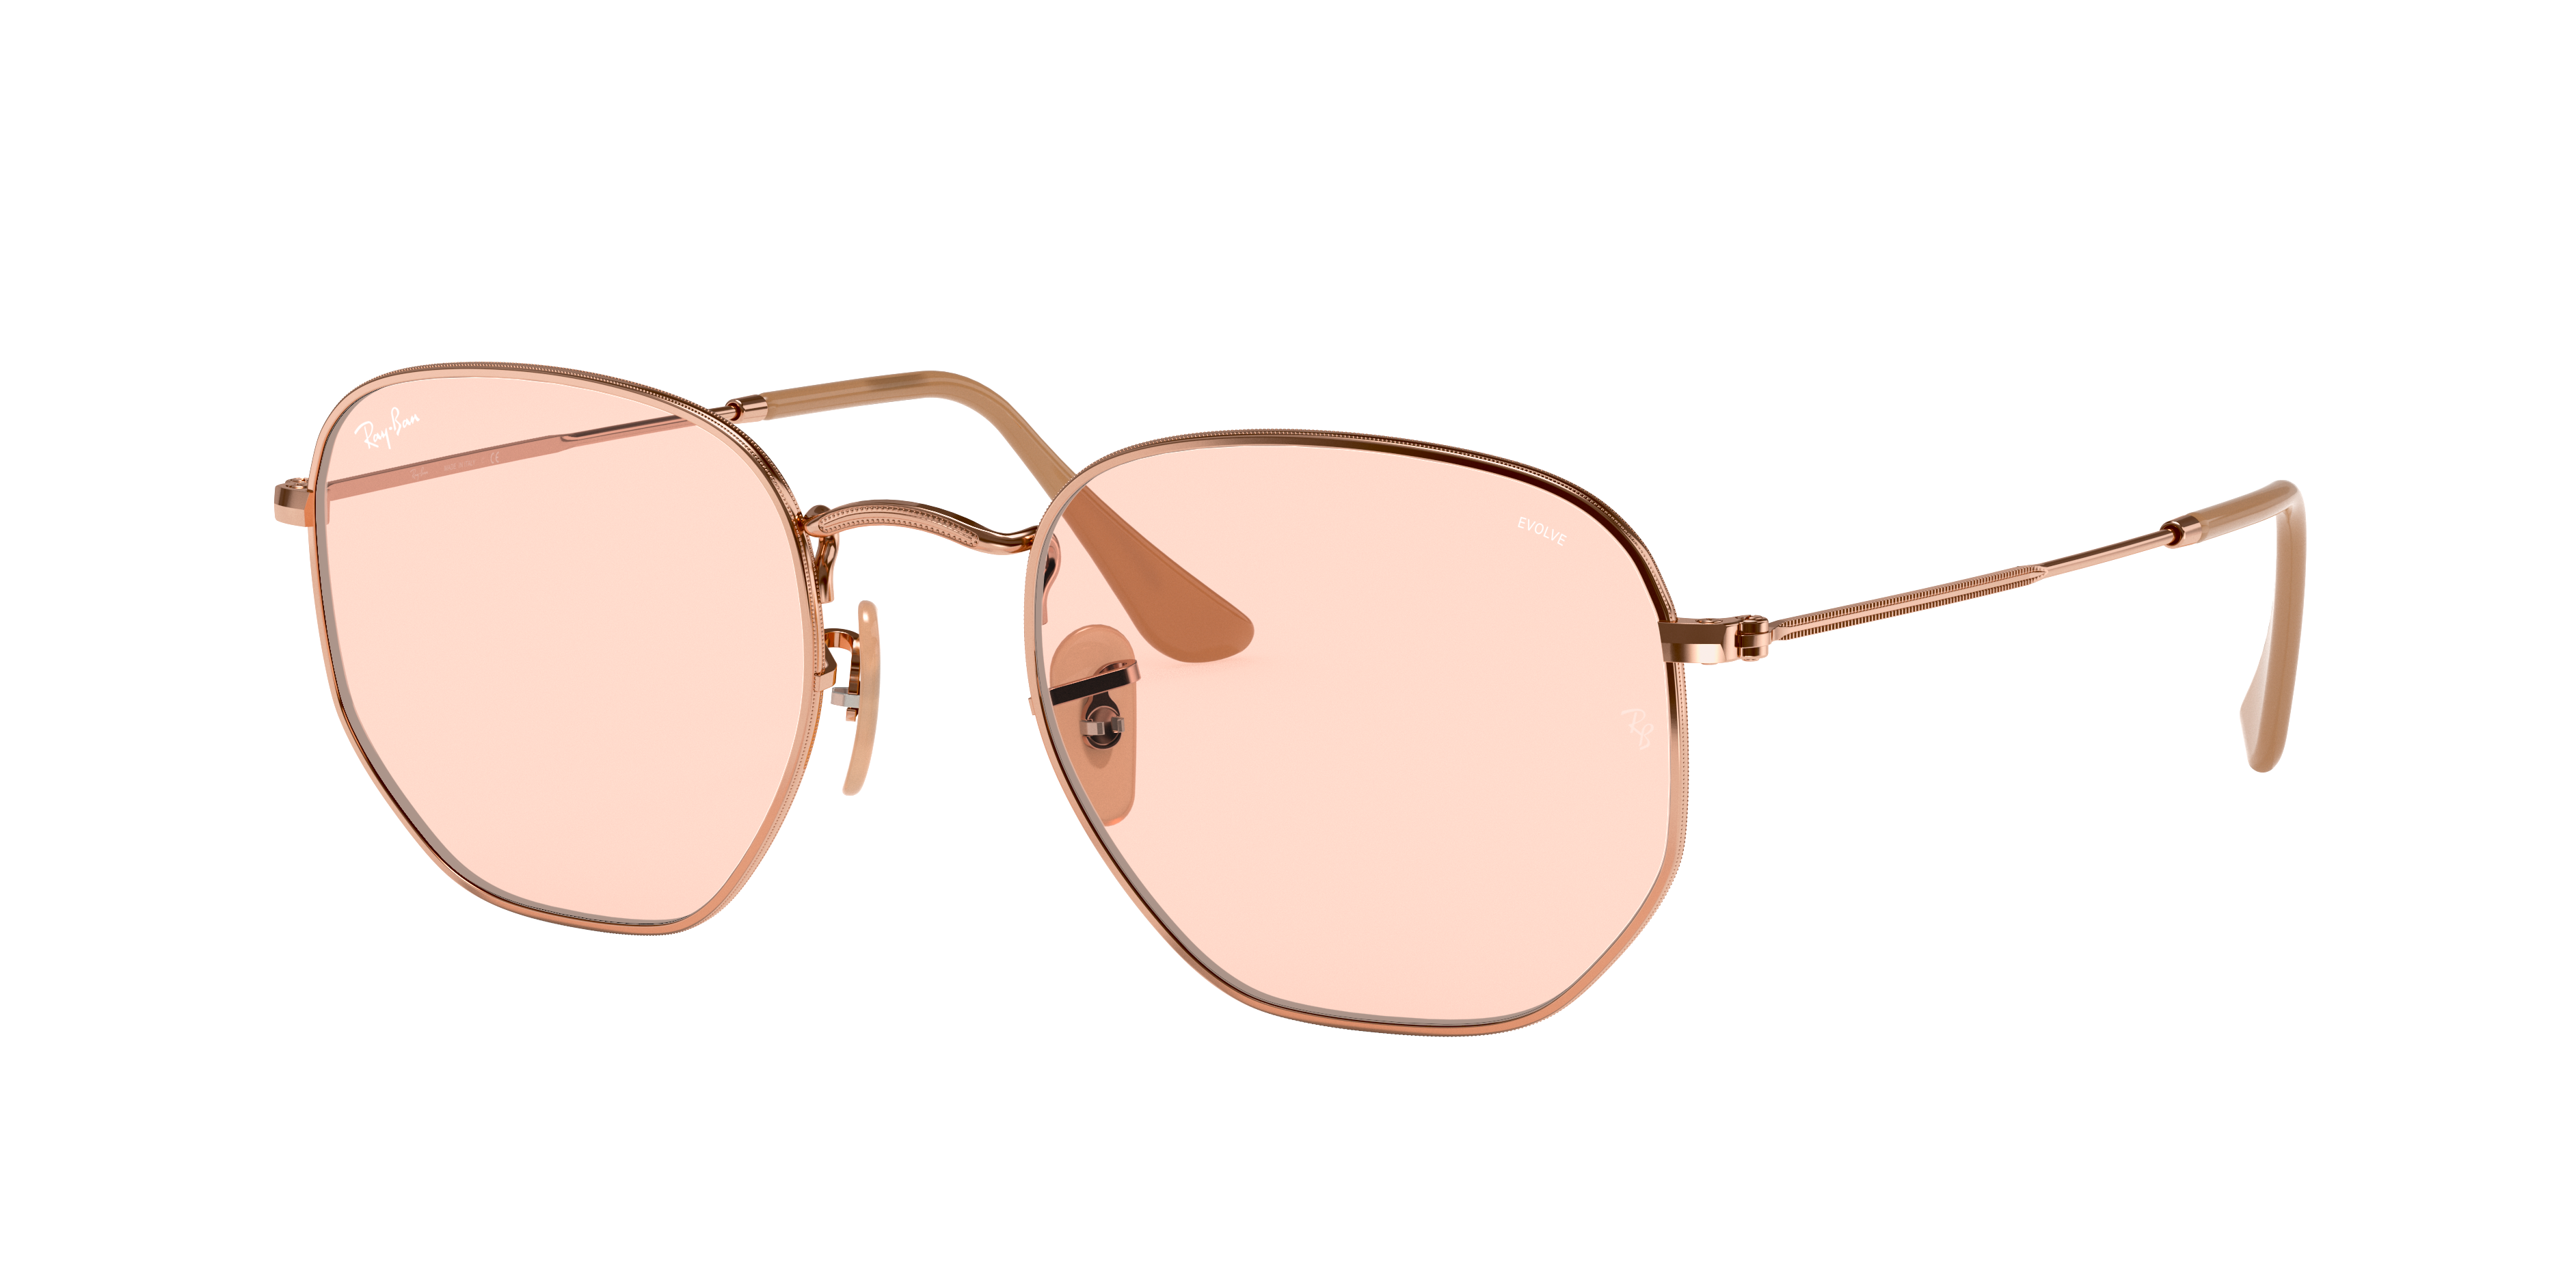 rechtbank chrysant periode Hexagonal Washed Evolve Sunglasses in Copper and Pink Photochromic | Ray-Ban ®